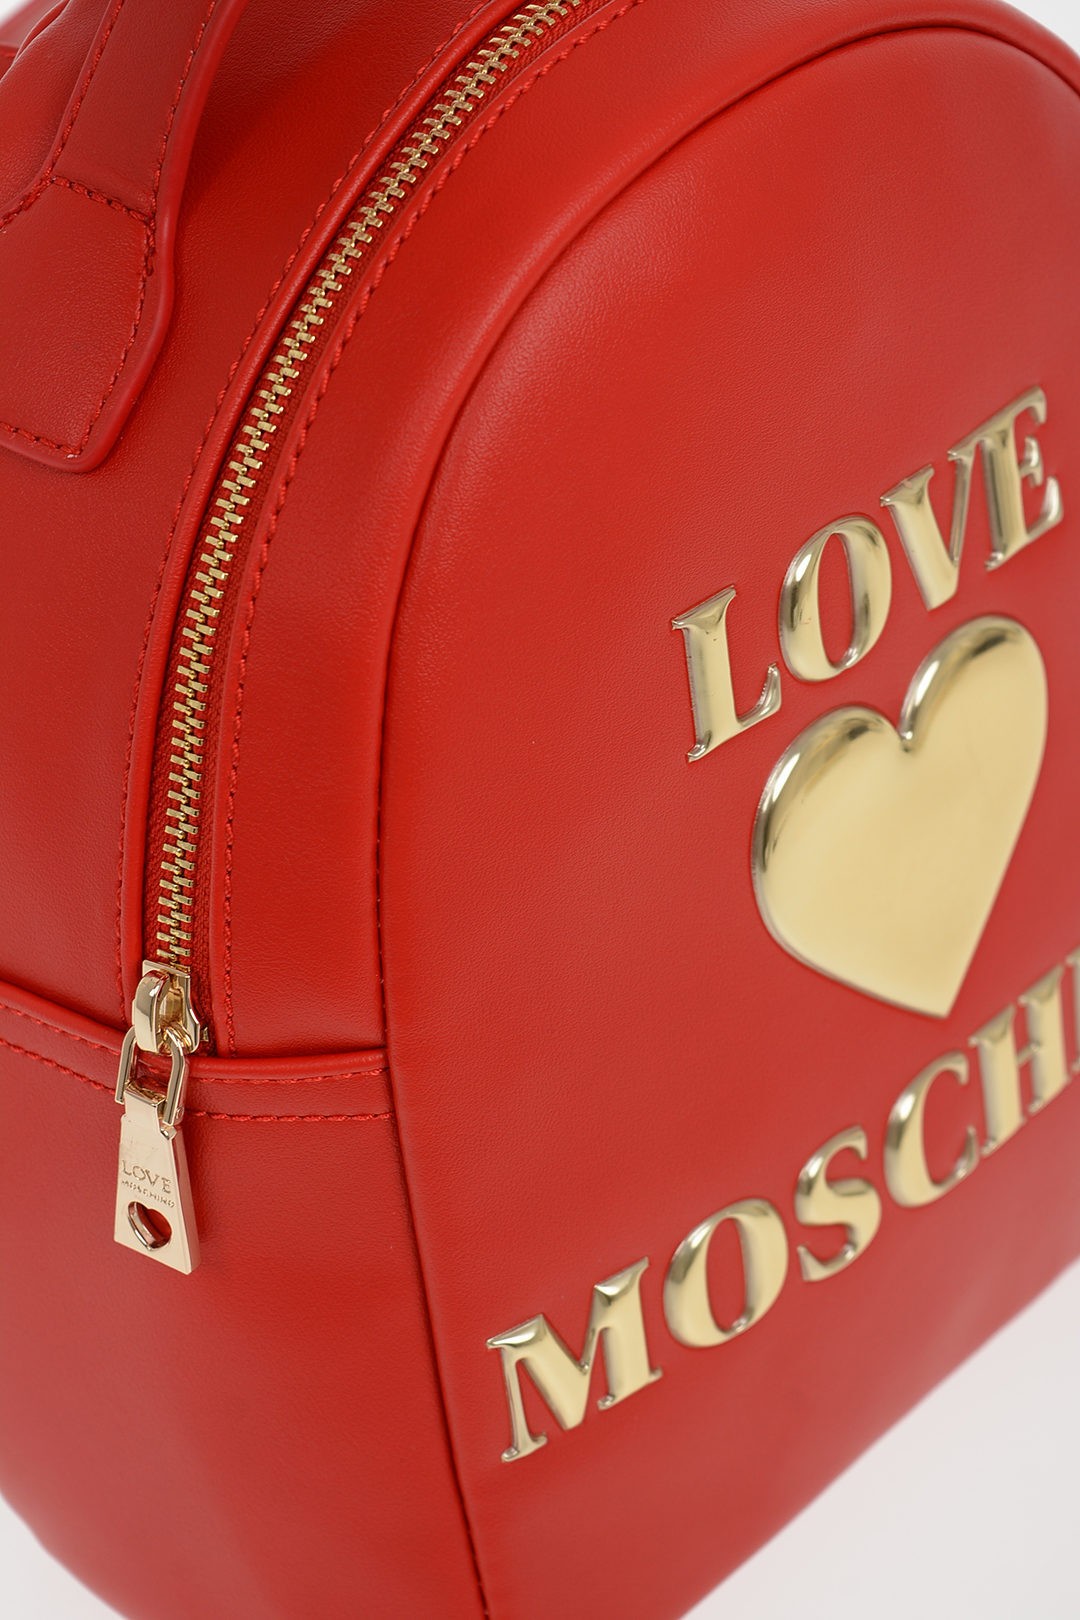 MOSCHINO モスキーノ Red バックパック JC4033PP1BLE0500 レディース LOVE FAUX LEATHER PADDED SHINY HEART BACKPACK 【関税・送料無料】【ラッピング無料】 dk